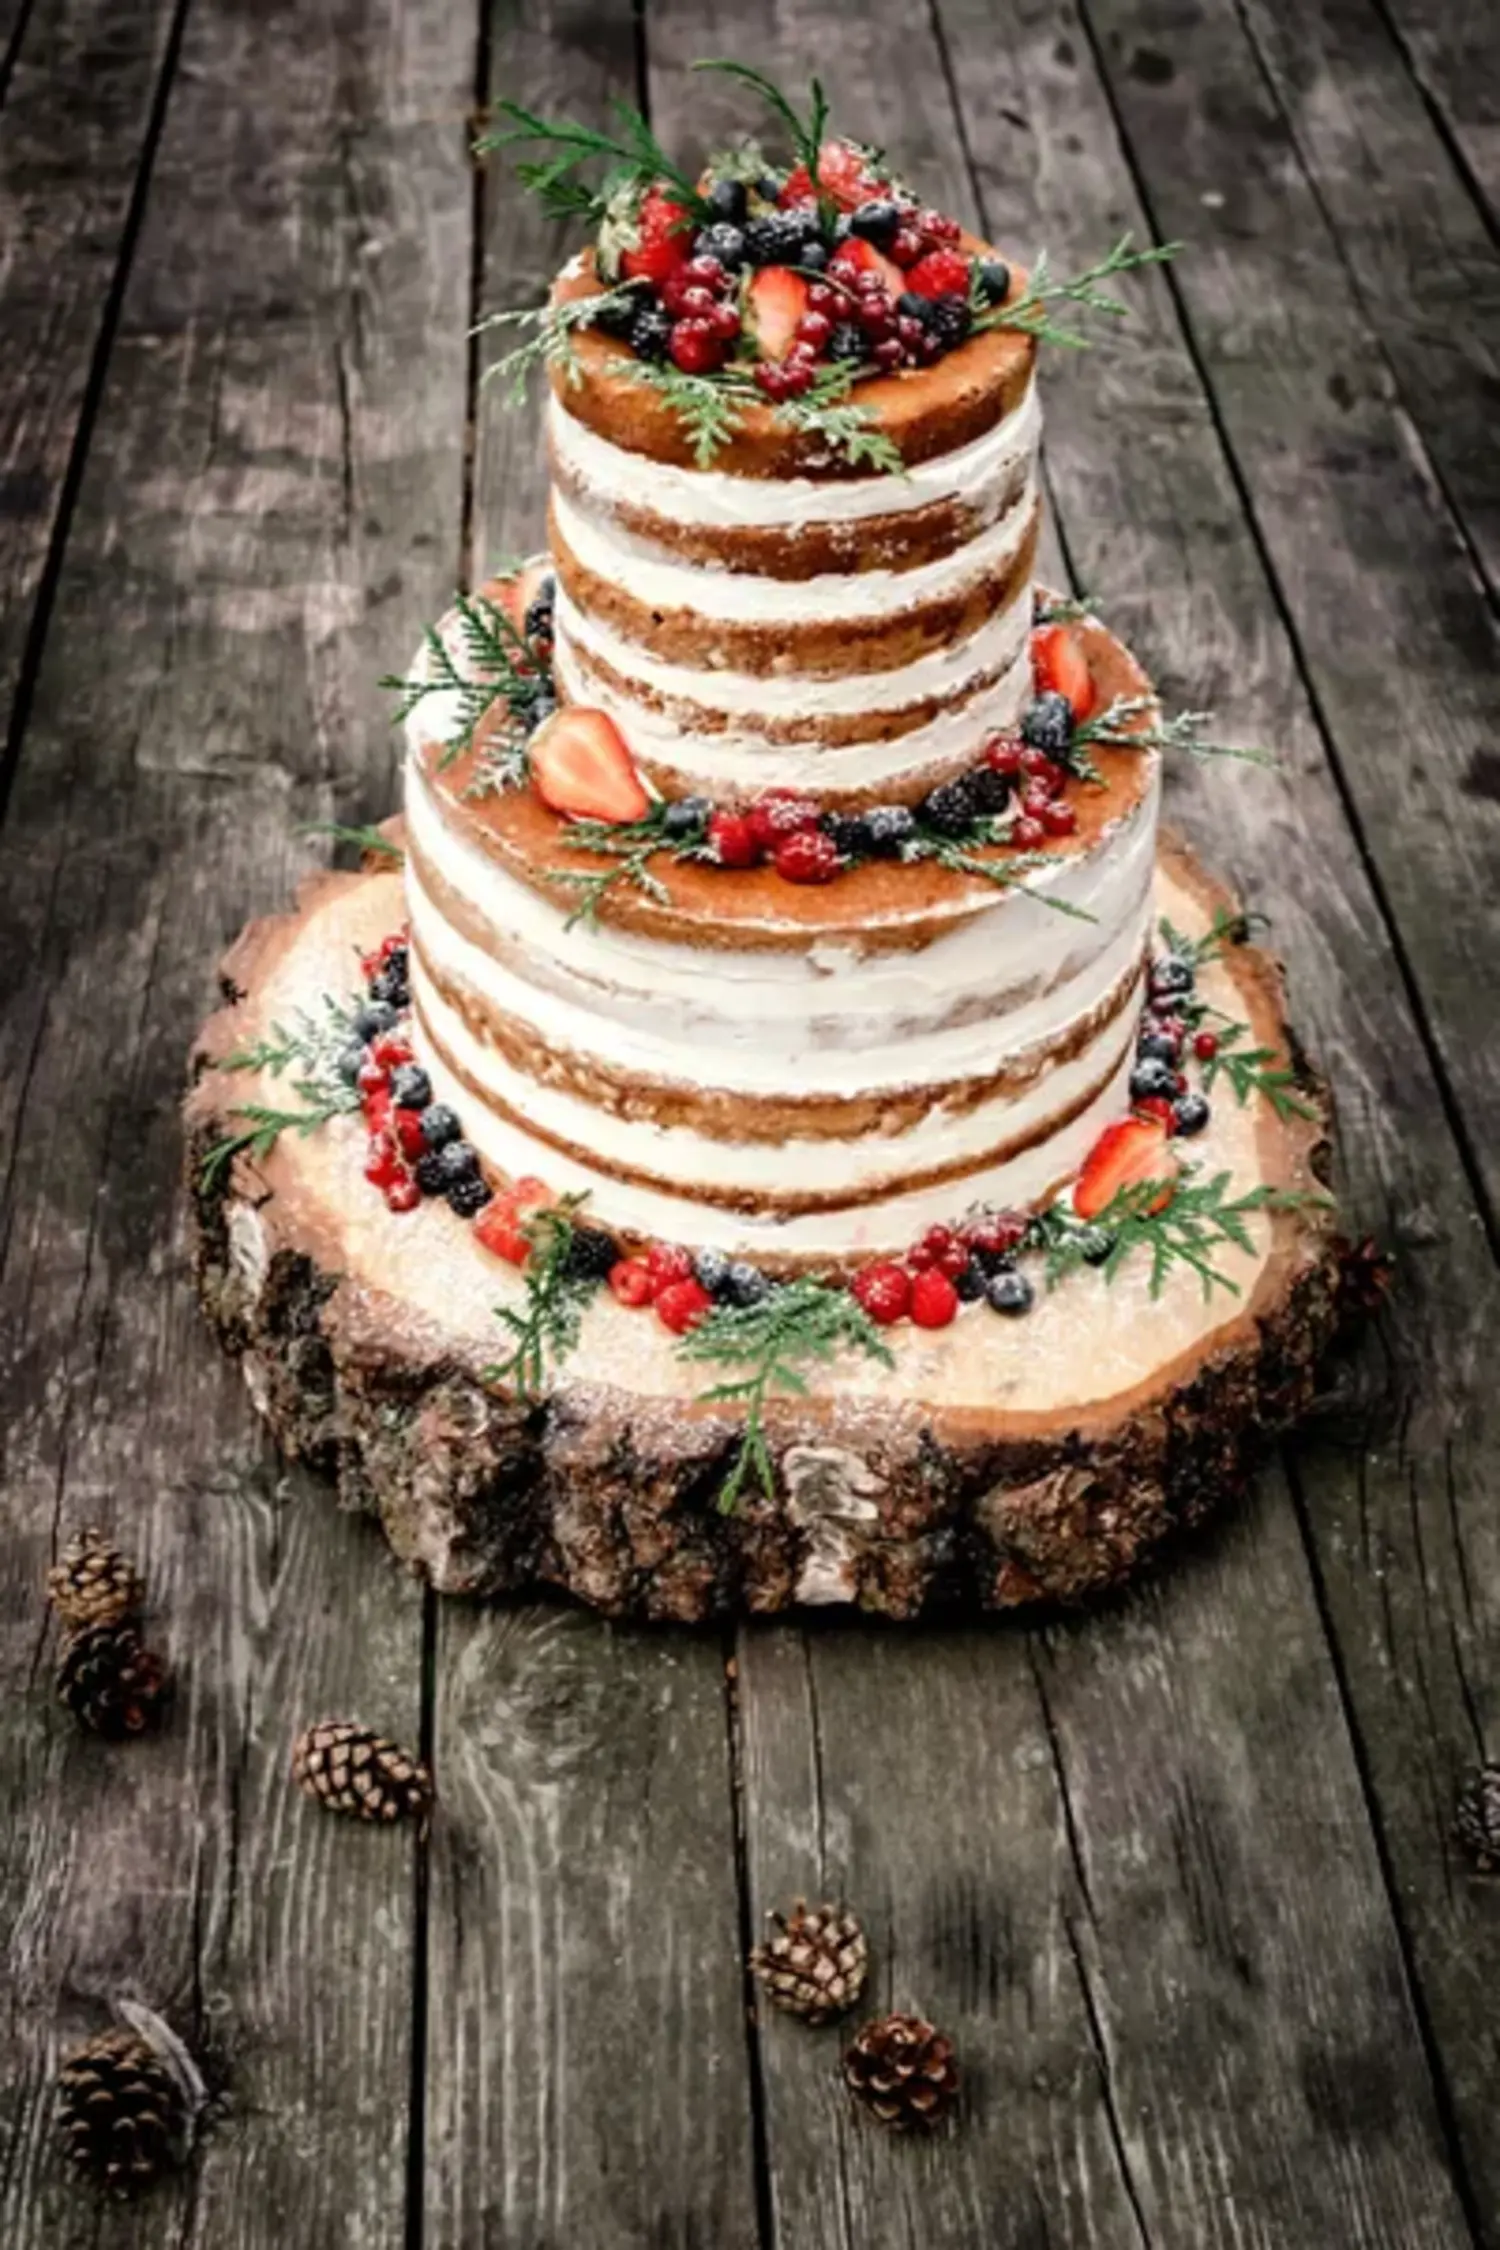 What Is a Rustic Wedding Cake